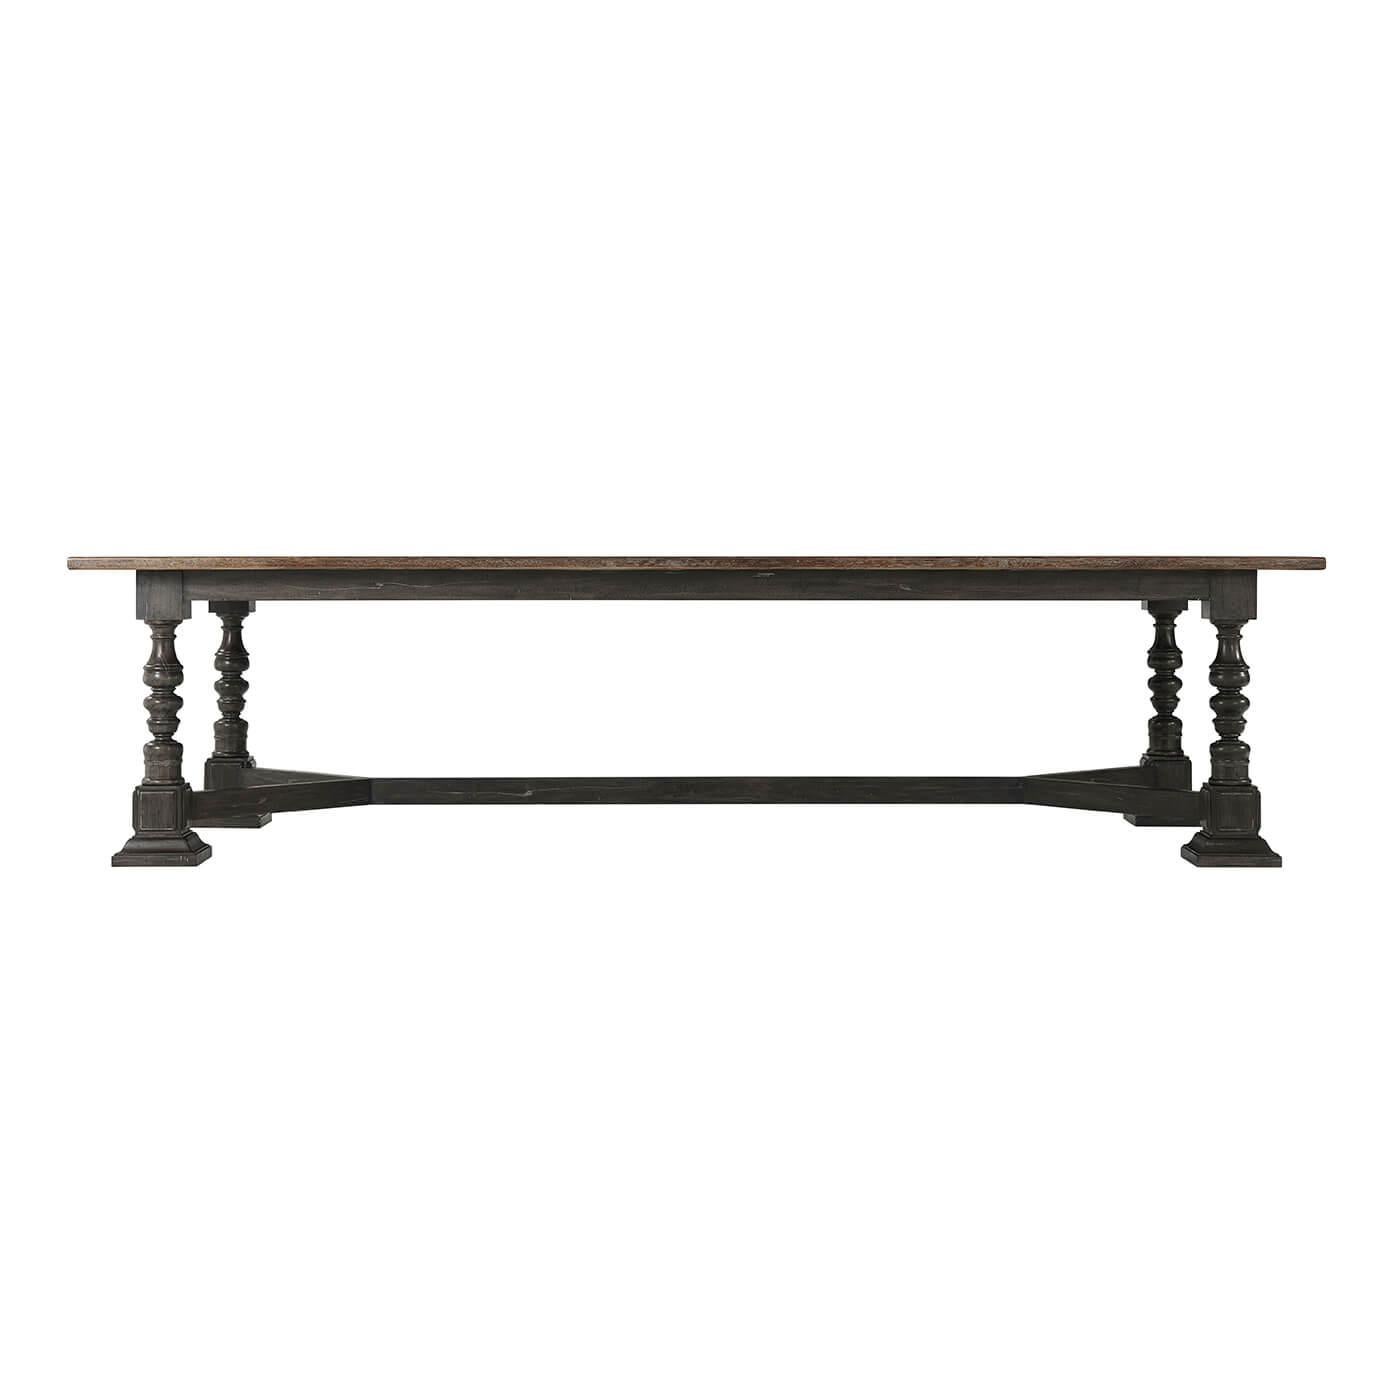 Antique style French oak veneered top rectangular dining table with a cerused Carmel finish raised on a solid cocoa finish base with turned legs and pedestal bases joined by a stretcher.
Dimensions: 120